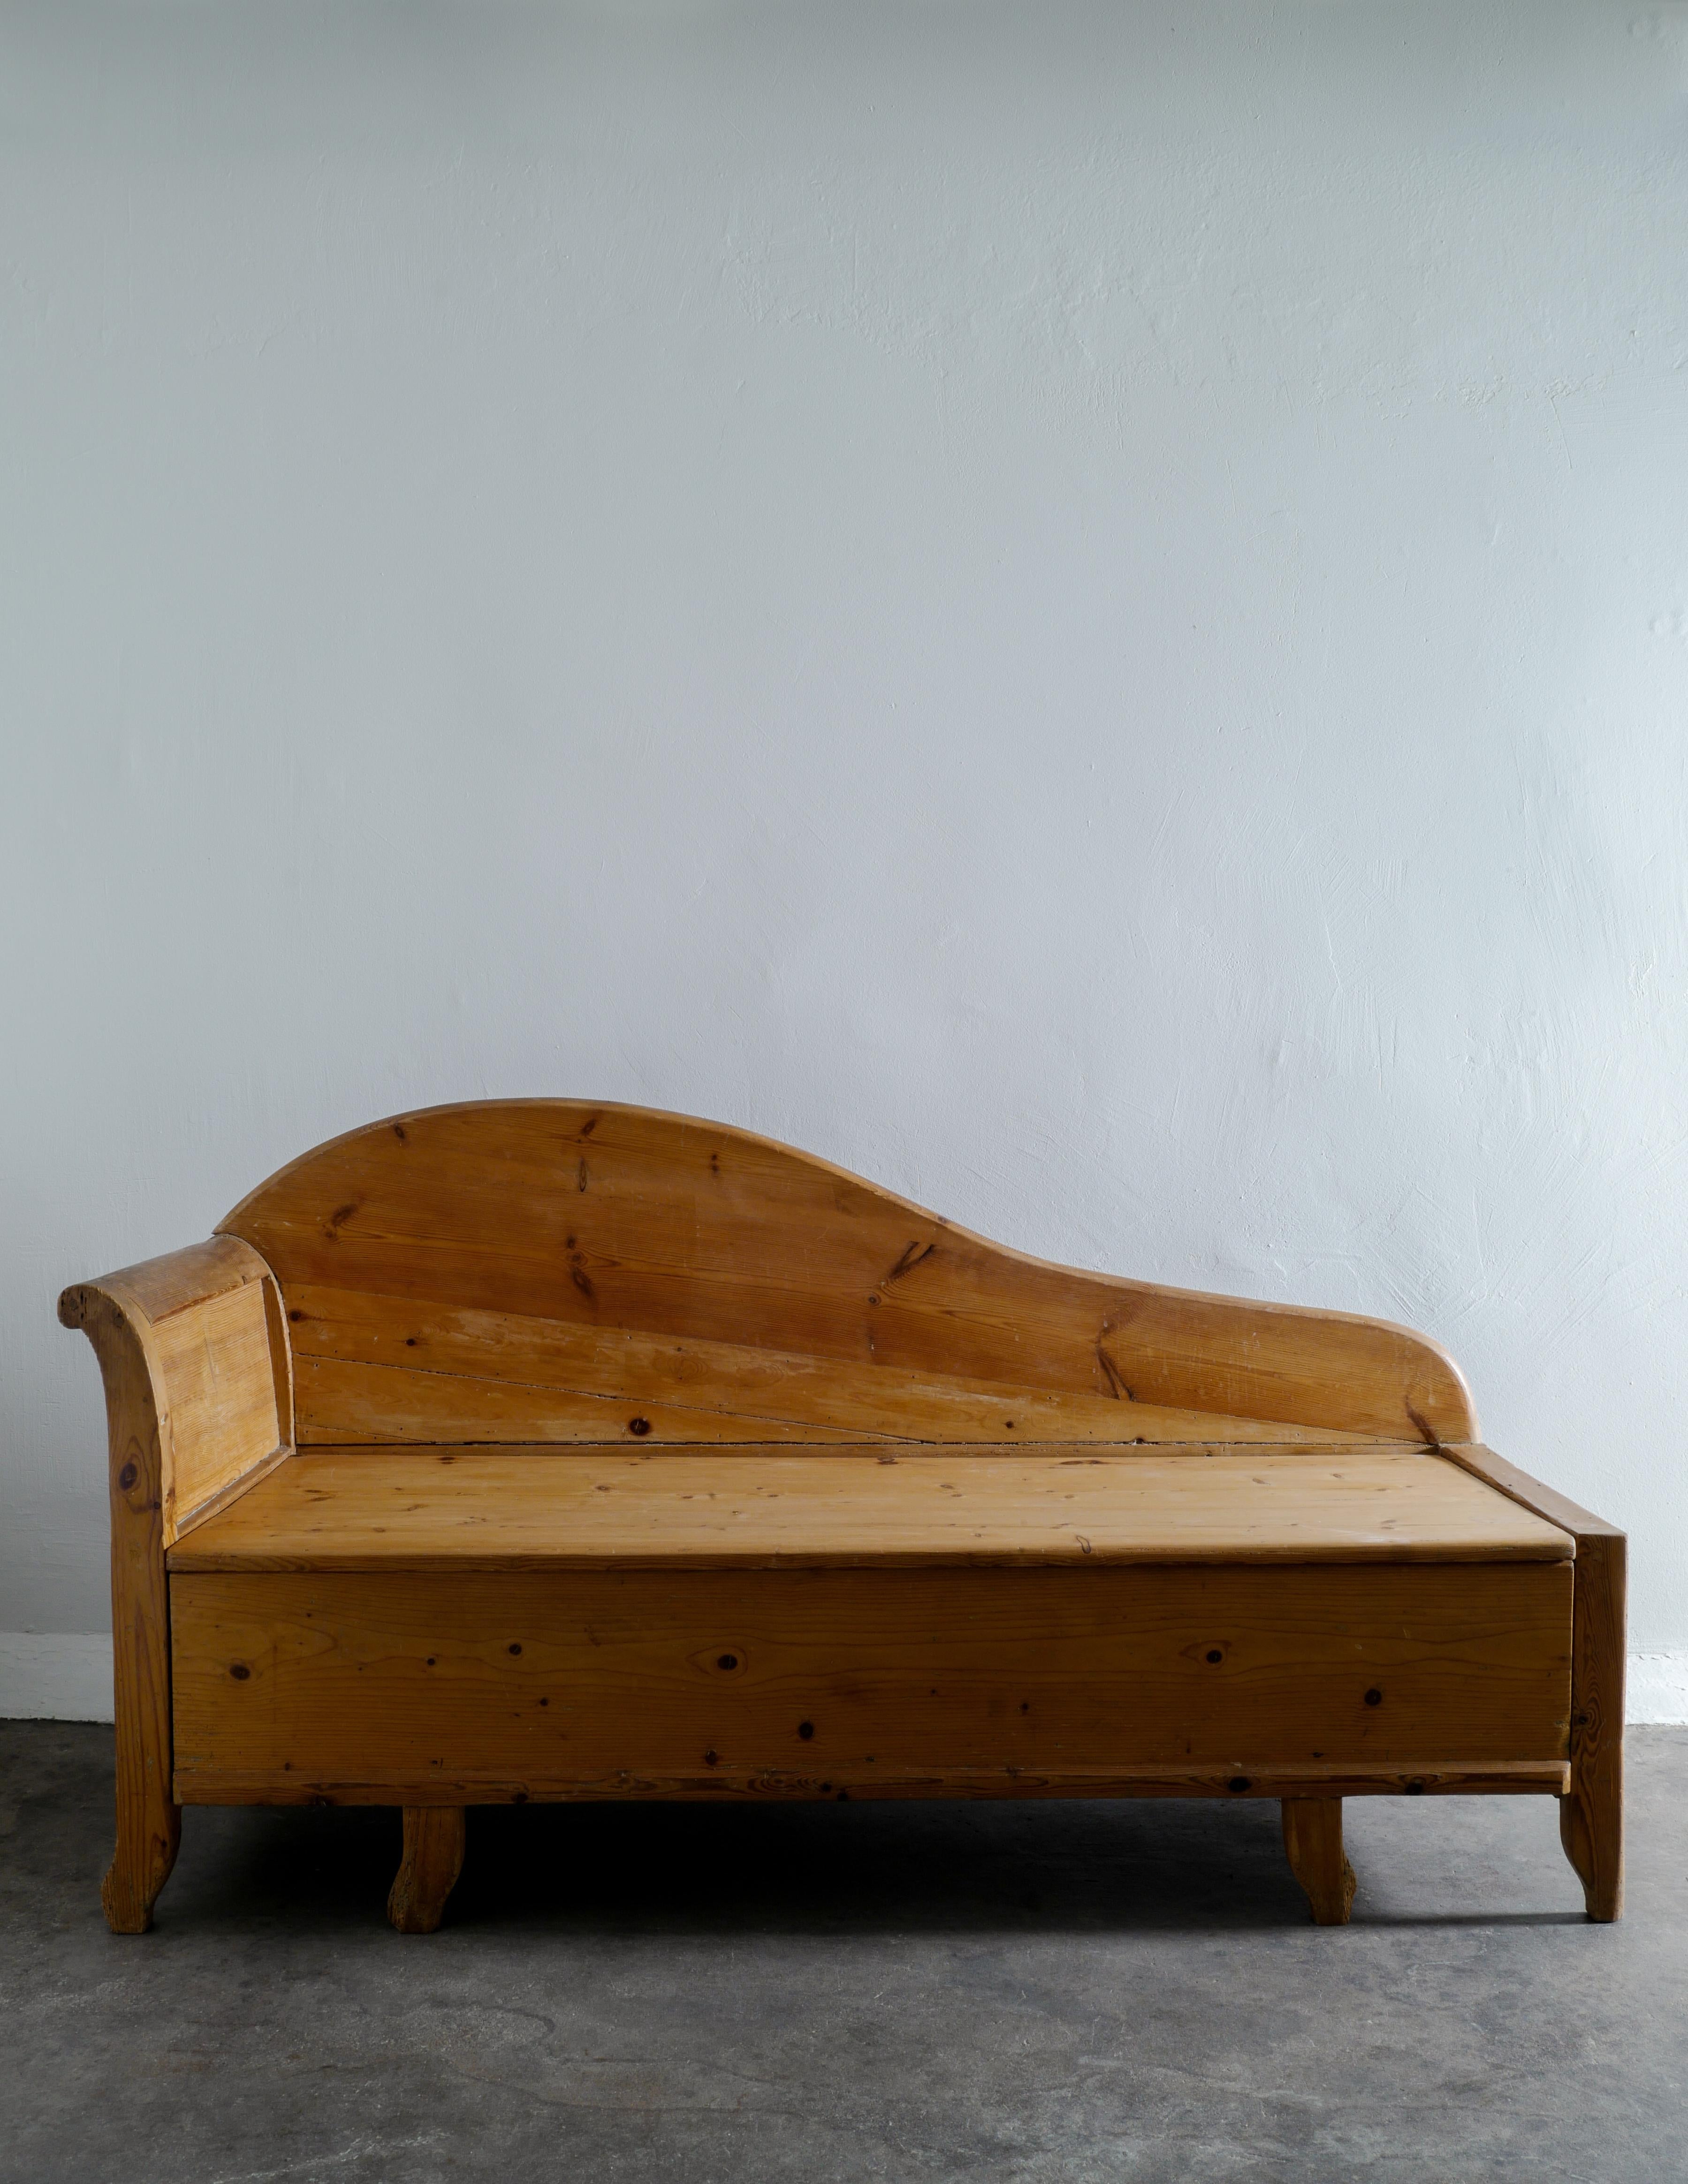 Rare and early midcentury sofa / bench in solid pine in style of Axel Einar Hjorth produced in Sweden early 1920s. In good vintage condition with patina from age and use. The back has a nice curved and sculptural freeform shape. Seat can be lifted